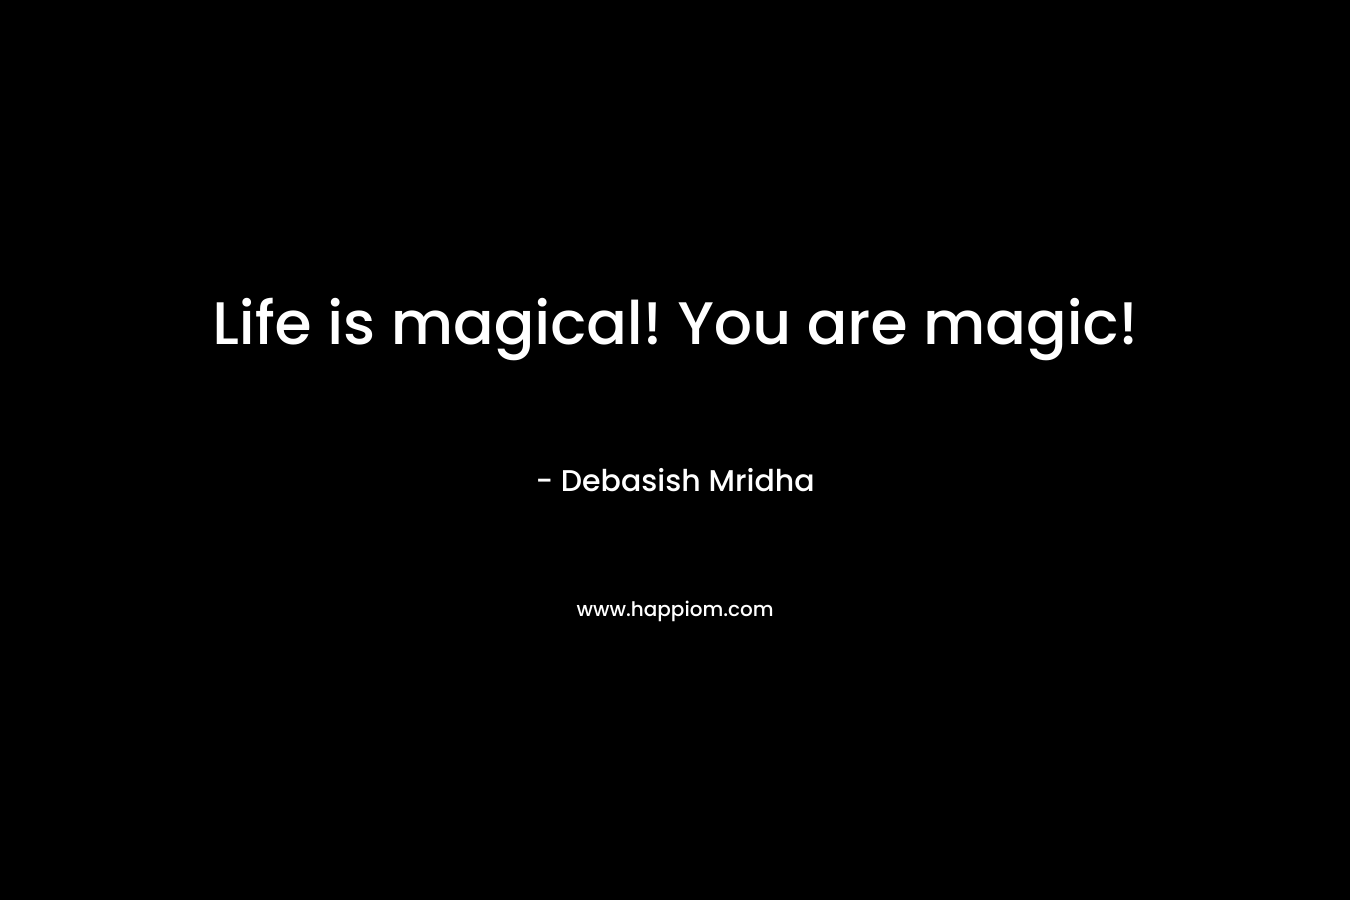 Life is magical! You are magic!